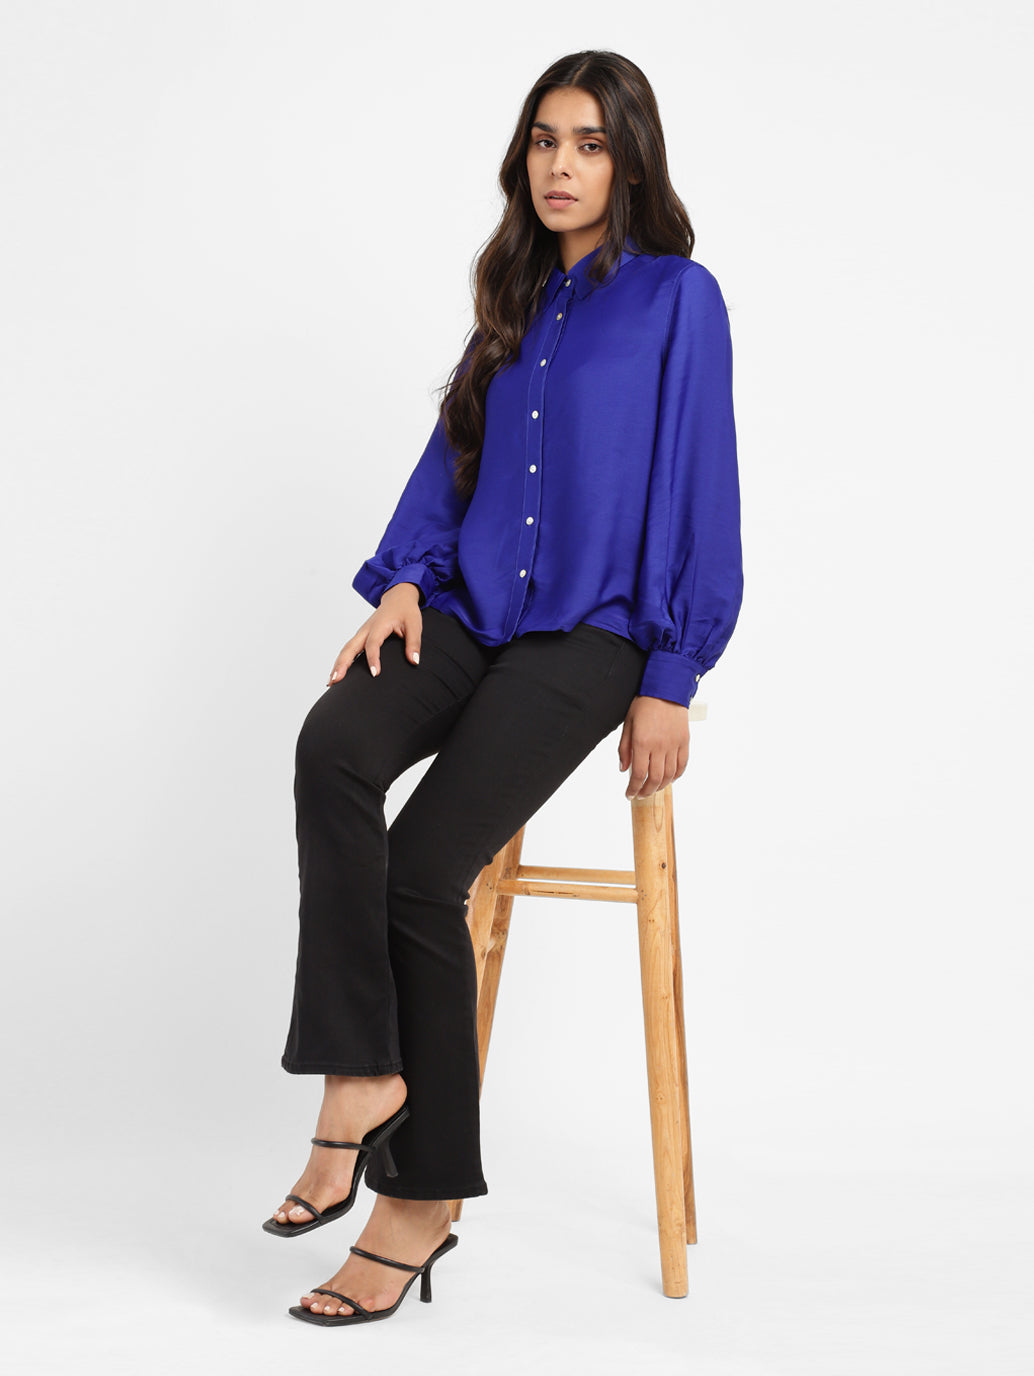 Women's Solid Relaxed Fit Shirt